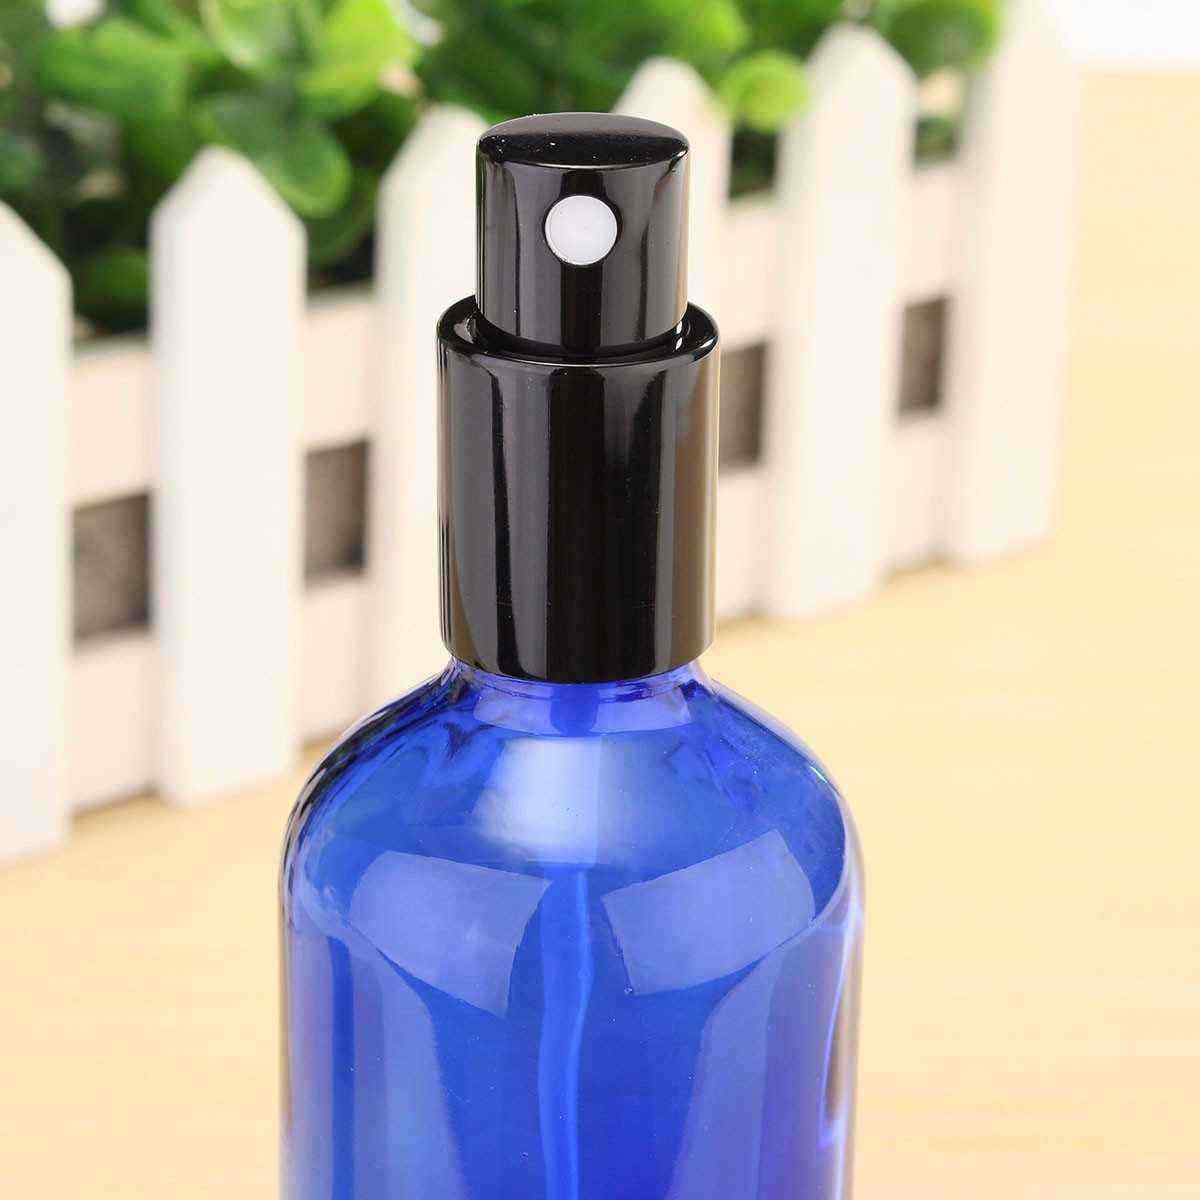 100ml-Refillable-Blue-Glass-Spray-Bottle-Perfume-Essential-Oils-with-DropperPipetteAtomiser-Cap-1126884